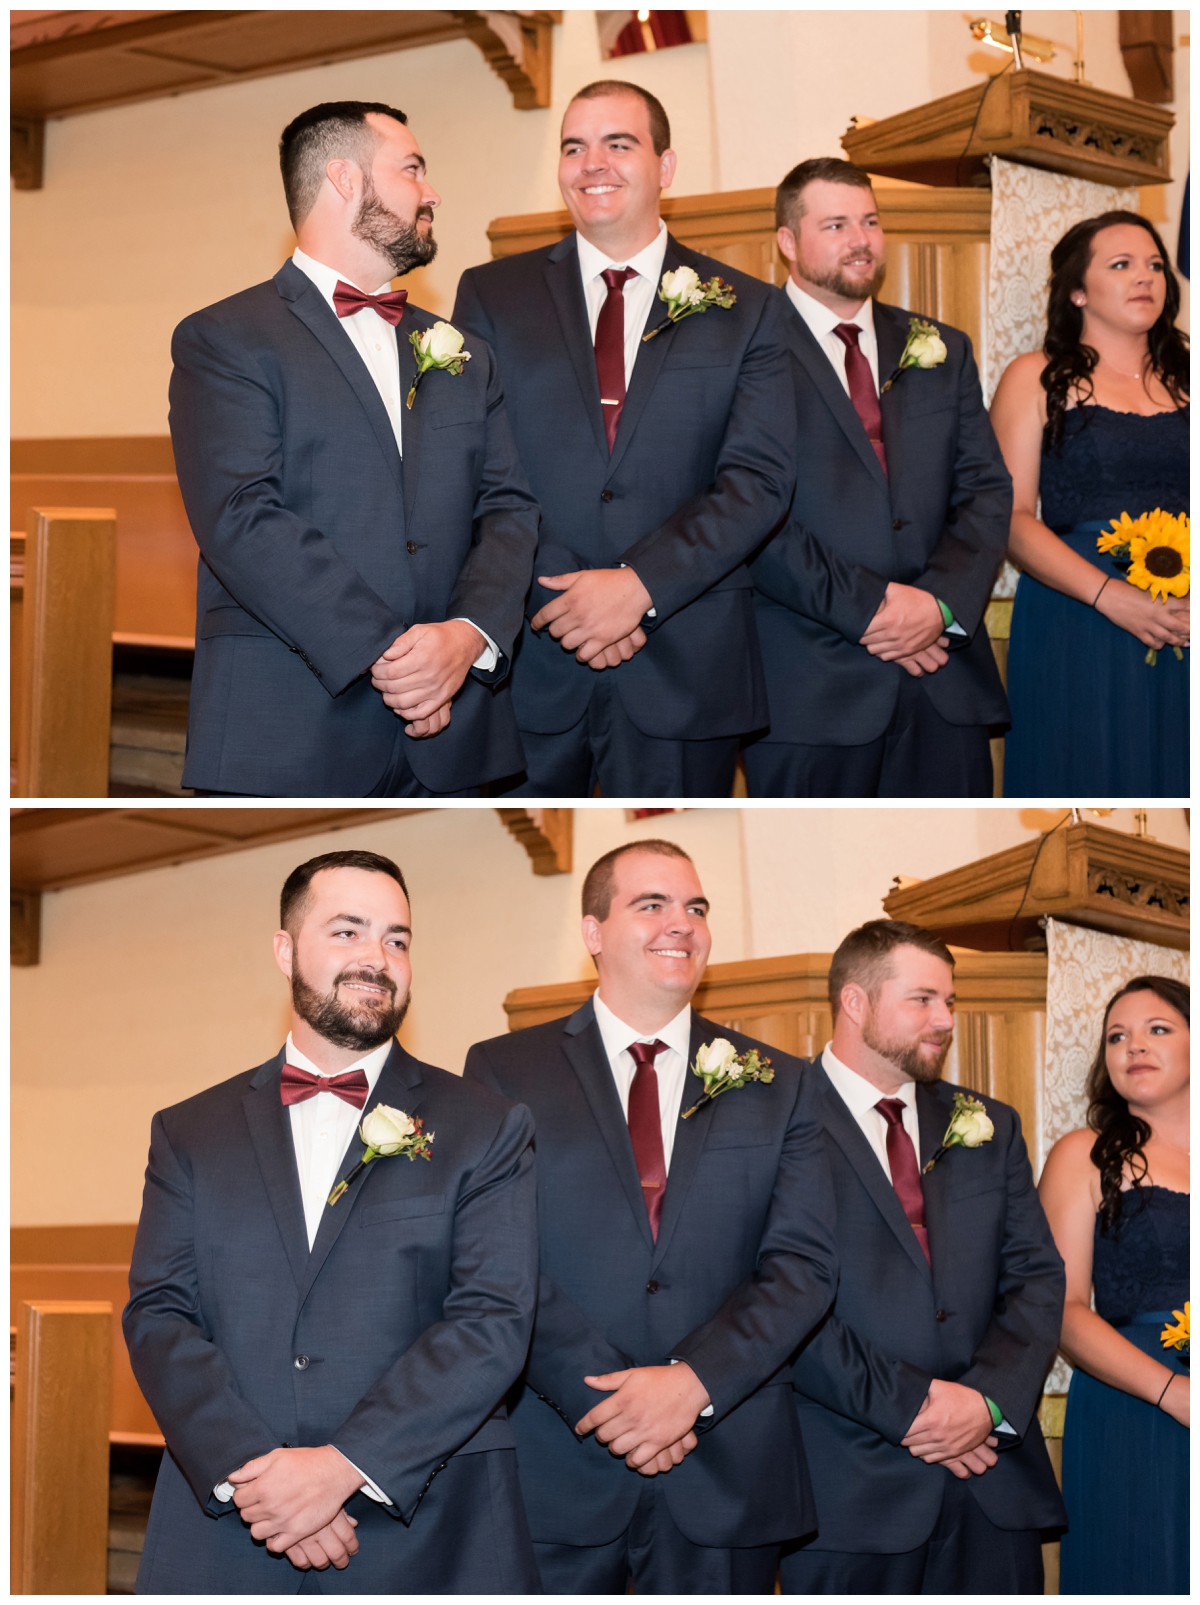 Grooms reaction to his bride walking down the aisle at Glyndon United Methodist Church.